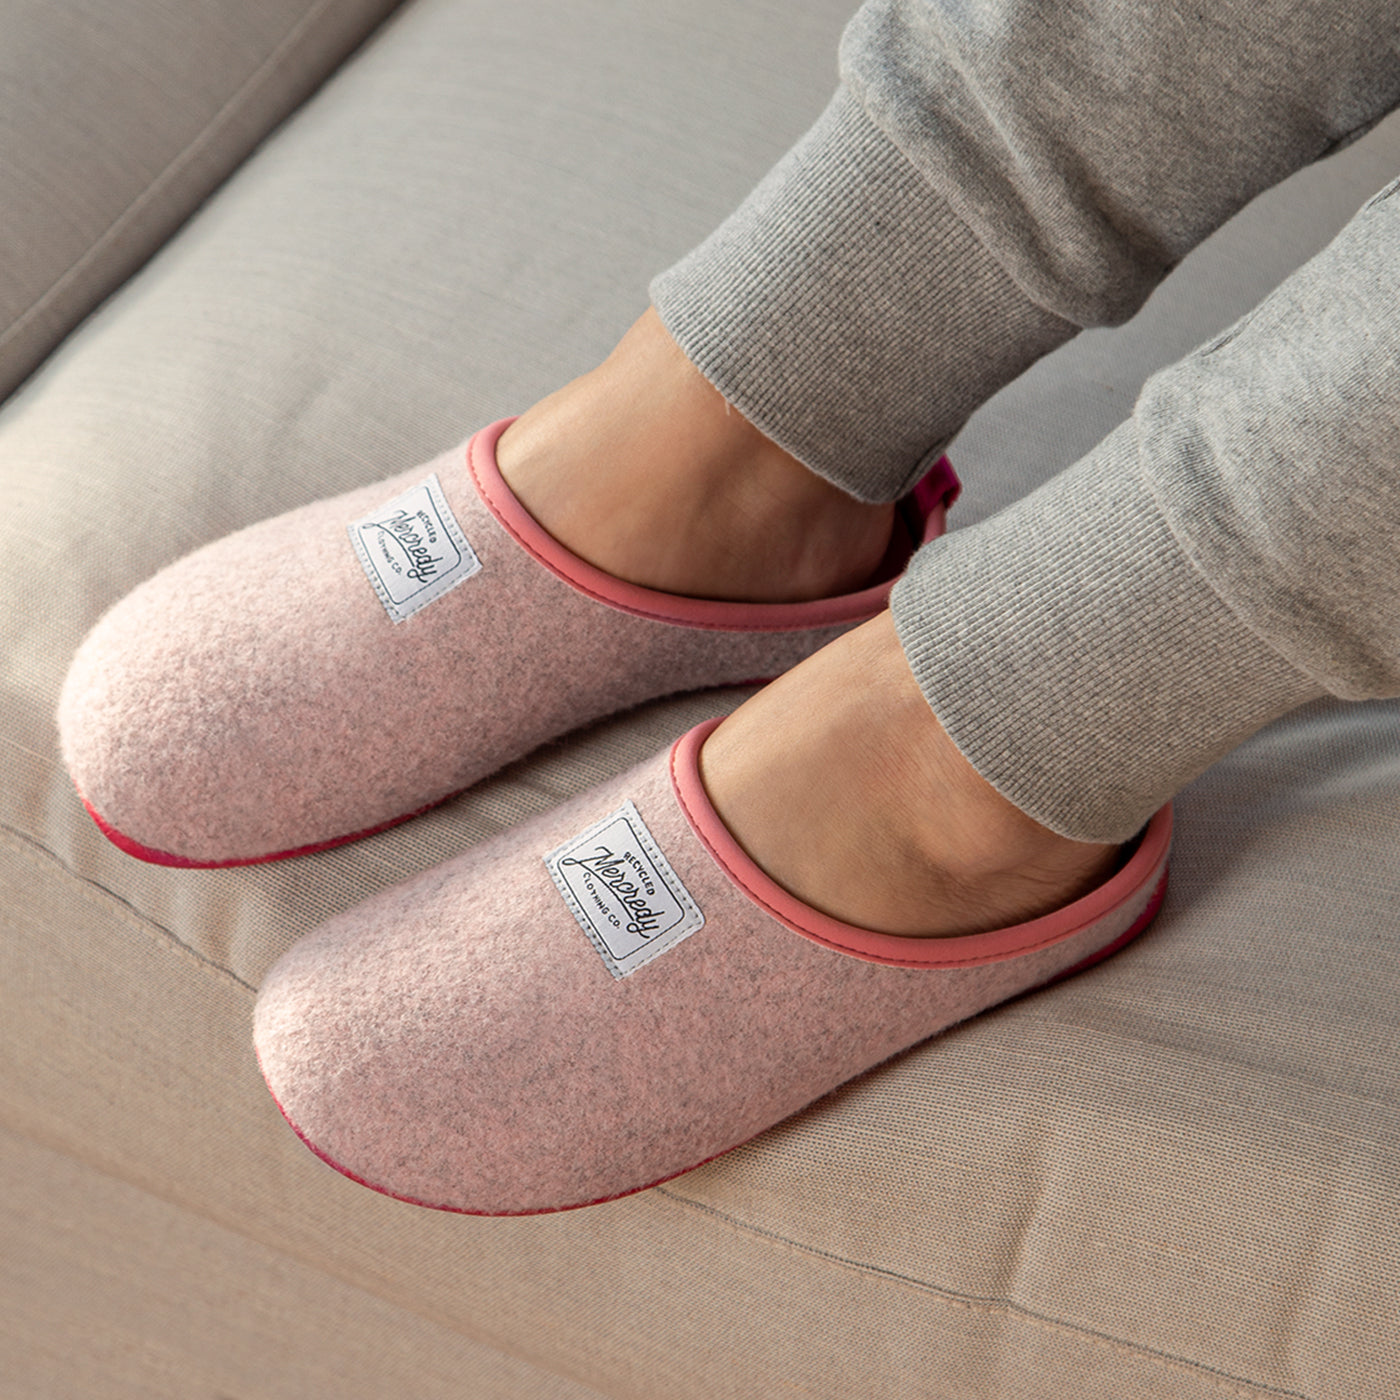 Mercredy Slippers - Ladies - Pink with Fuchsia Sole